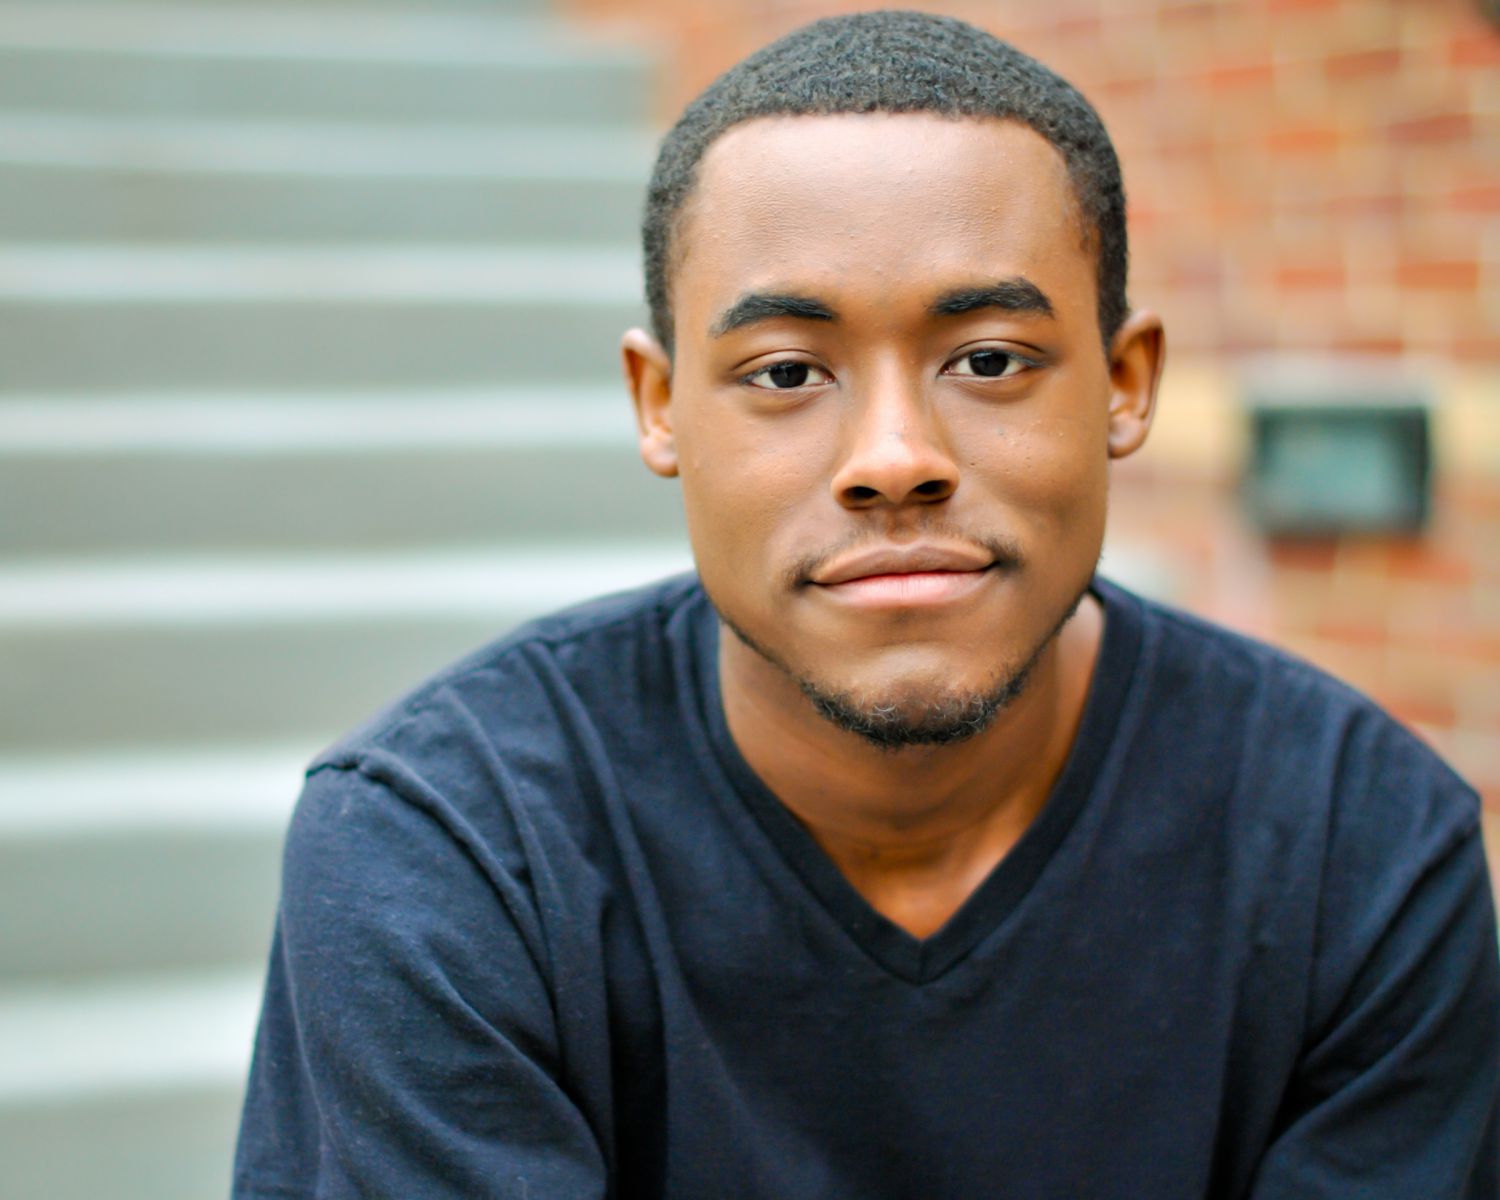 Senior Theatre major Vaughn Midder is a finalist for the Byrd Citizenship and Wilson H. Elkins Awards